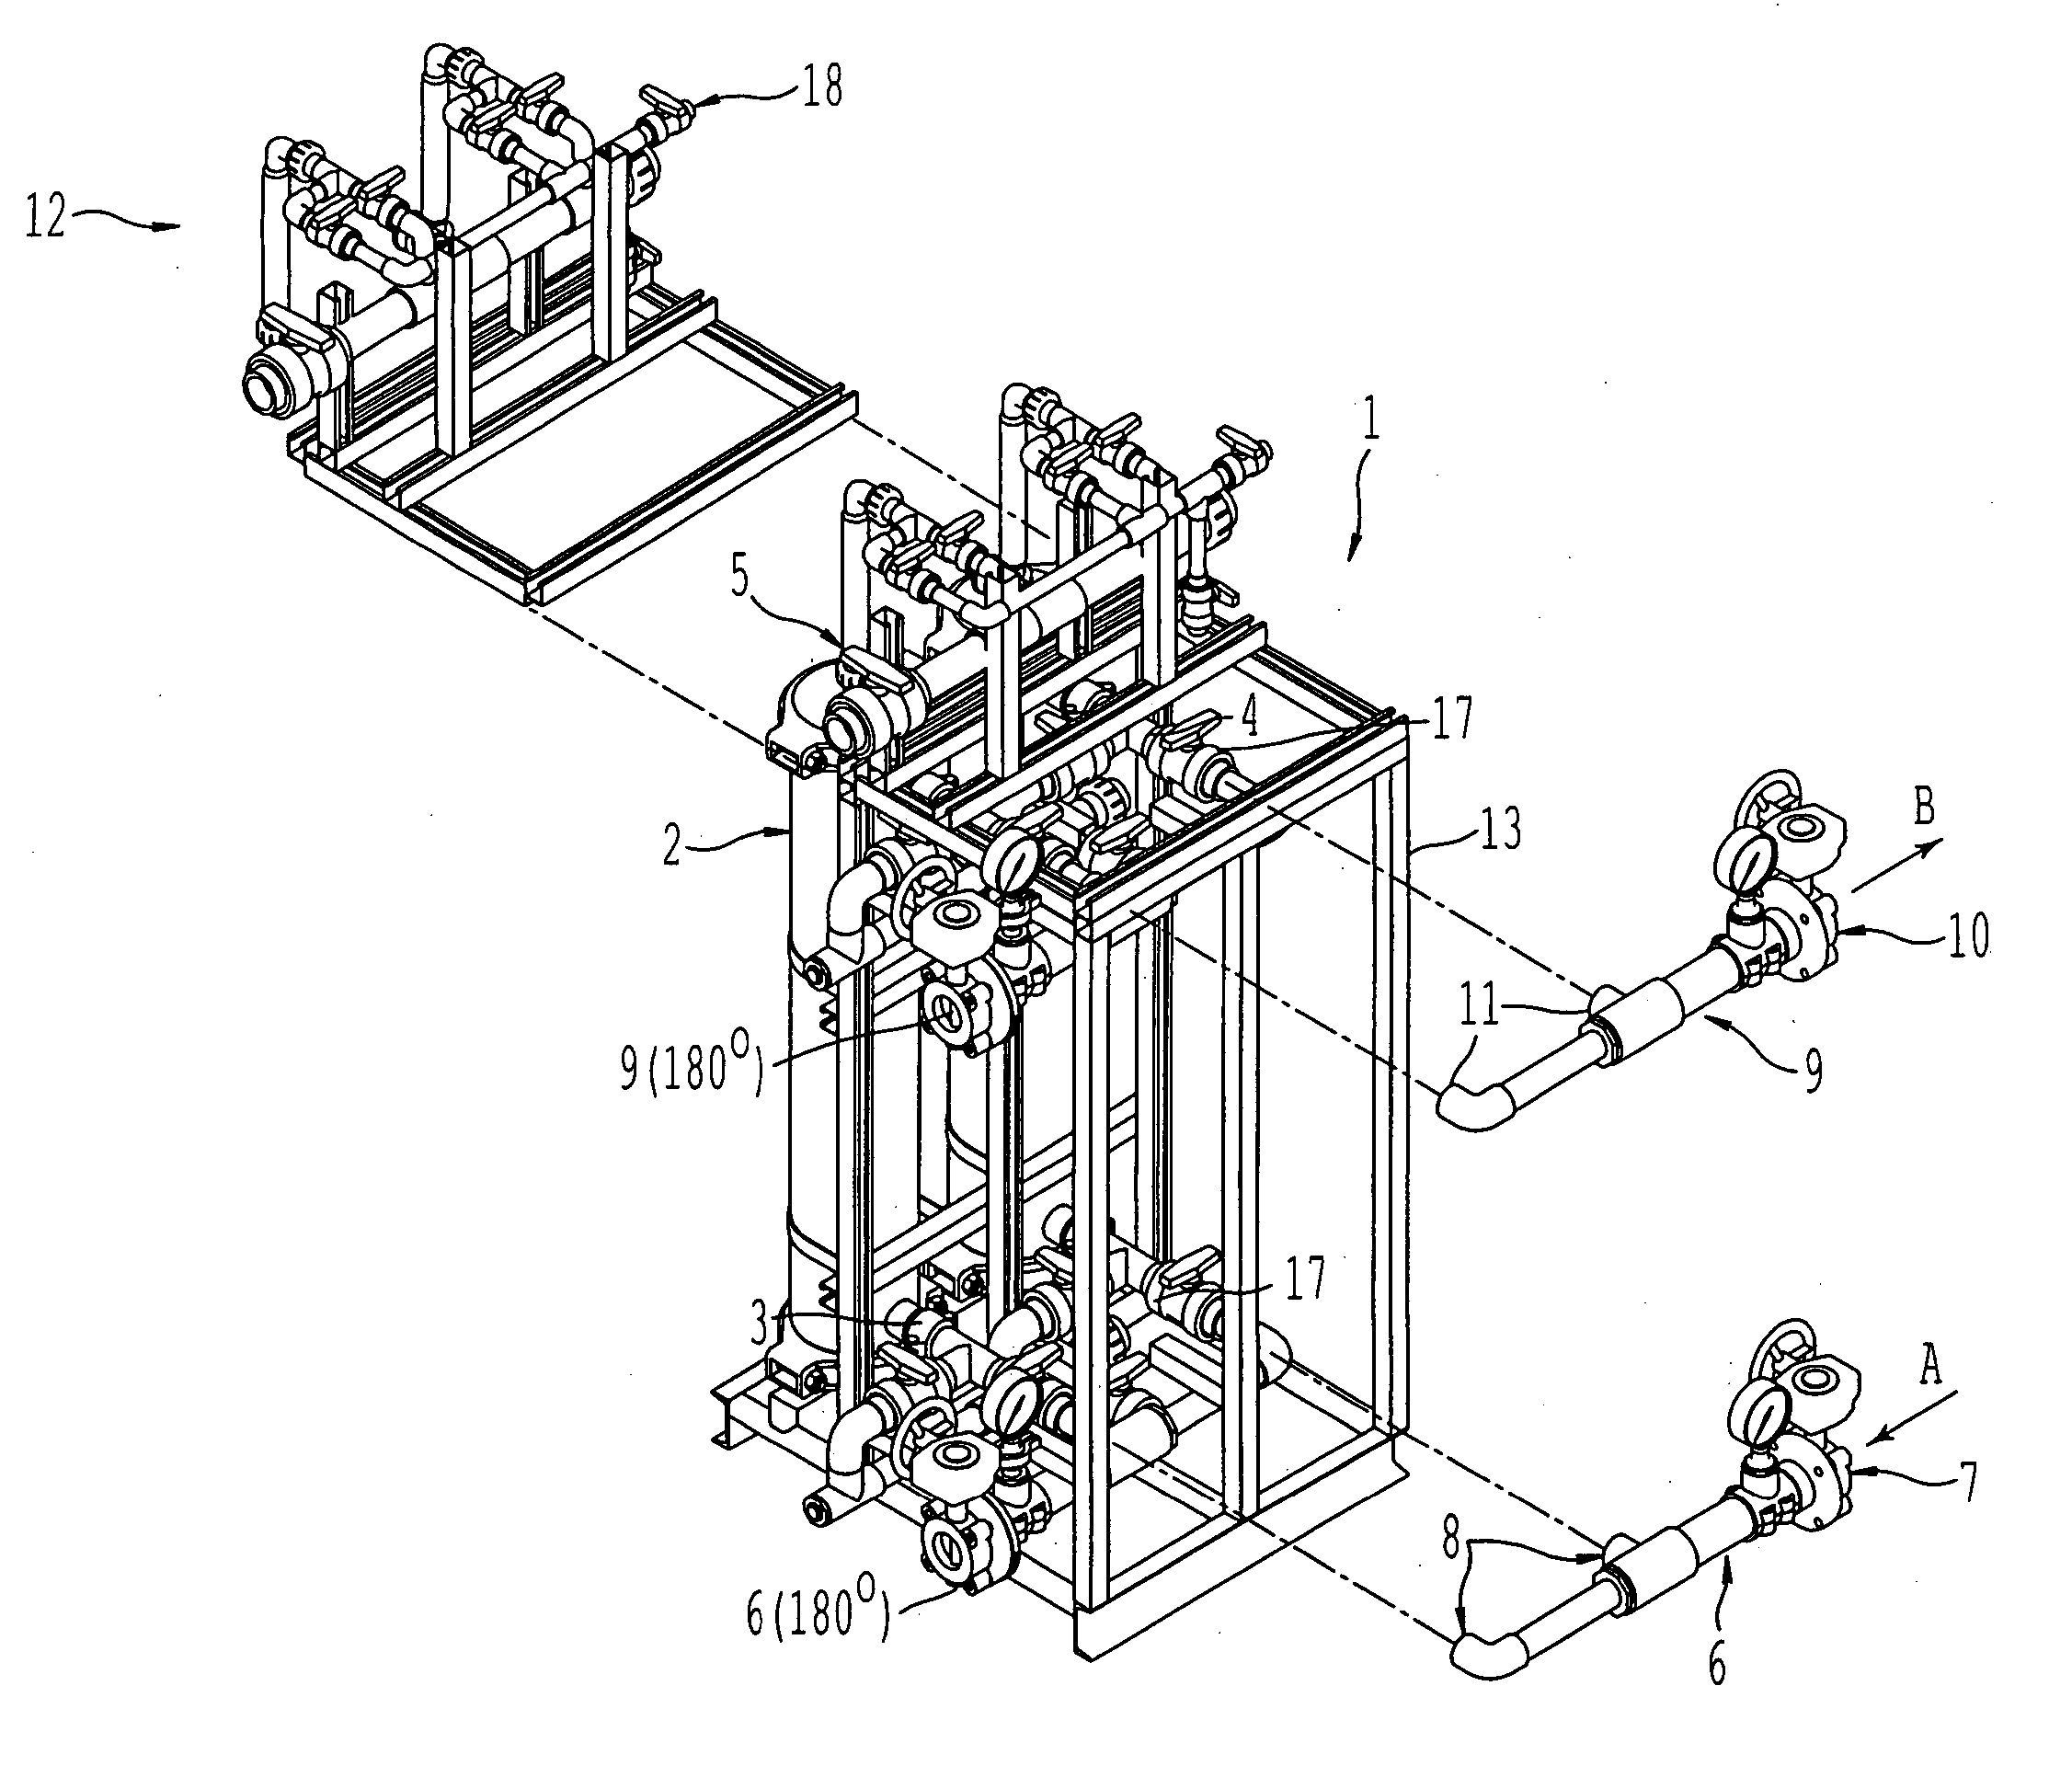 Modular fluid processing system with reversible plumbing connection